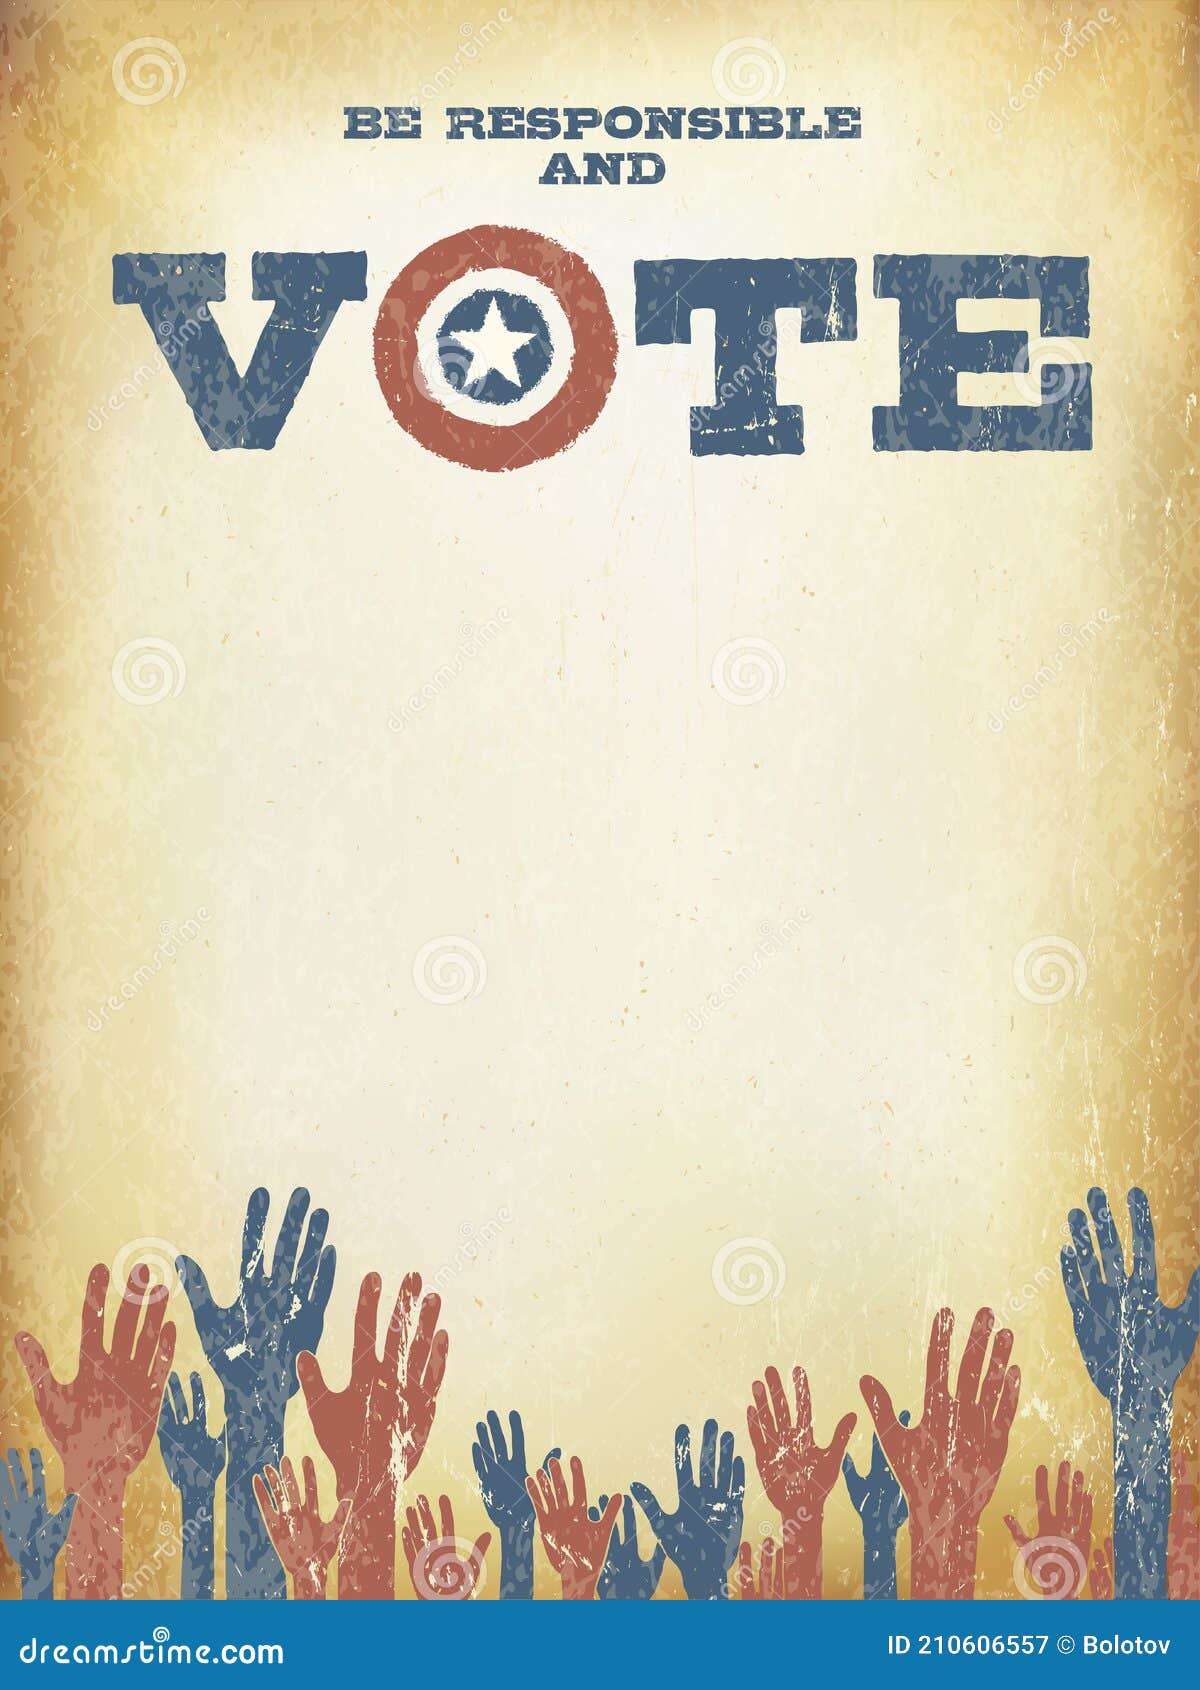 4732 Election Poster In India Images Stock Photos  Vectors  Shutterstock